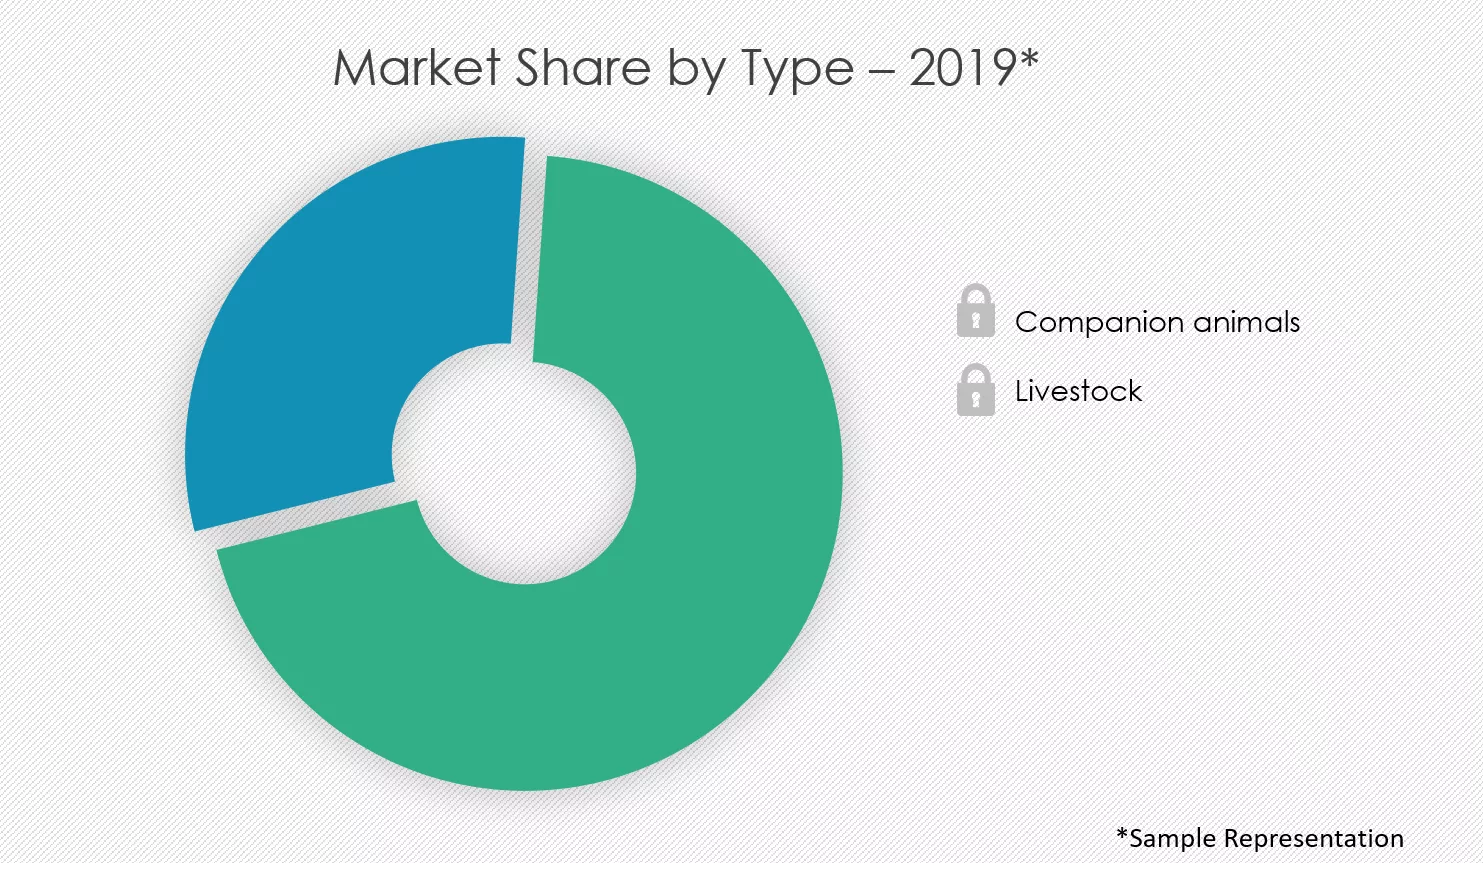 Veterinary-Diagnostic-Devices-Market-Share-by-Type